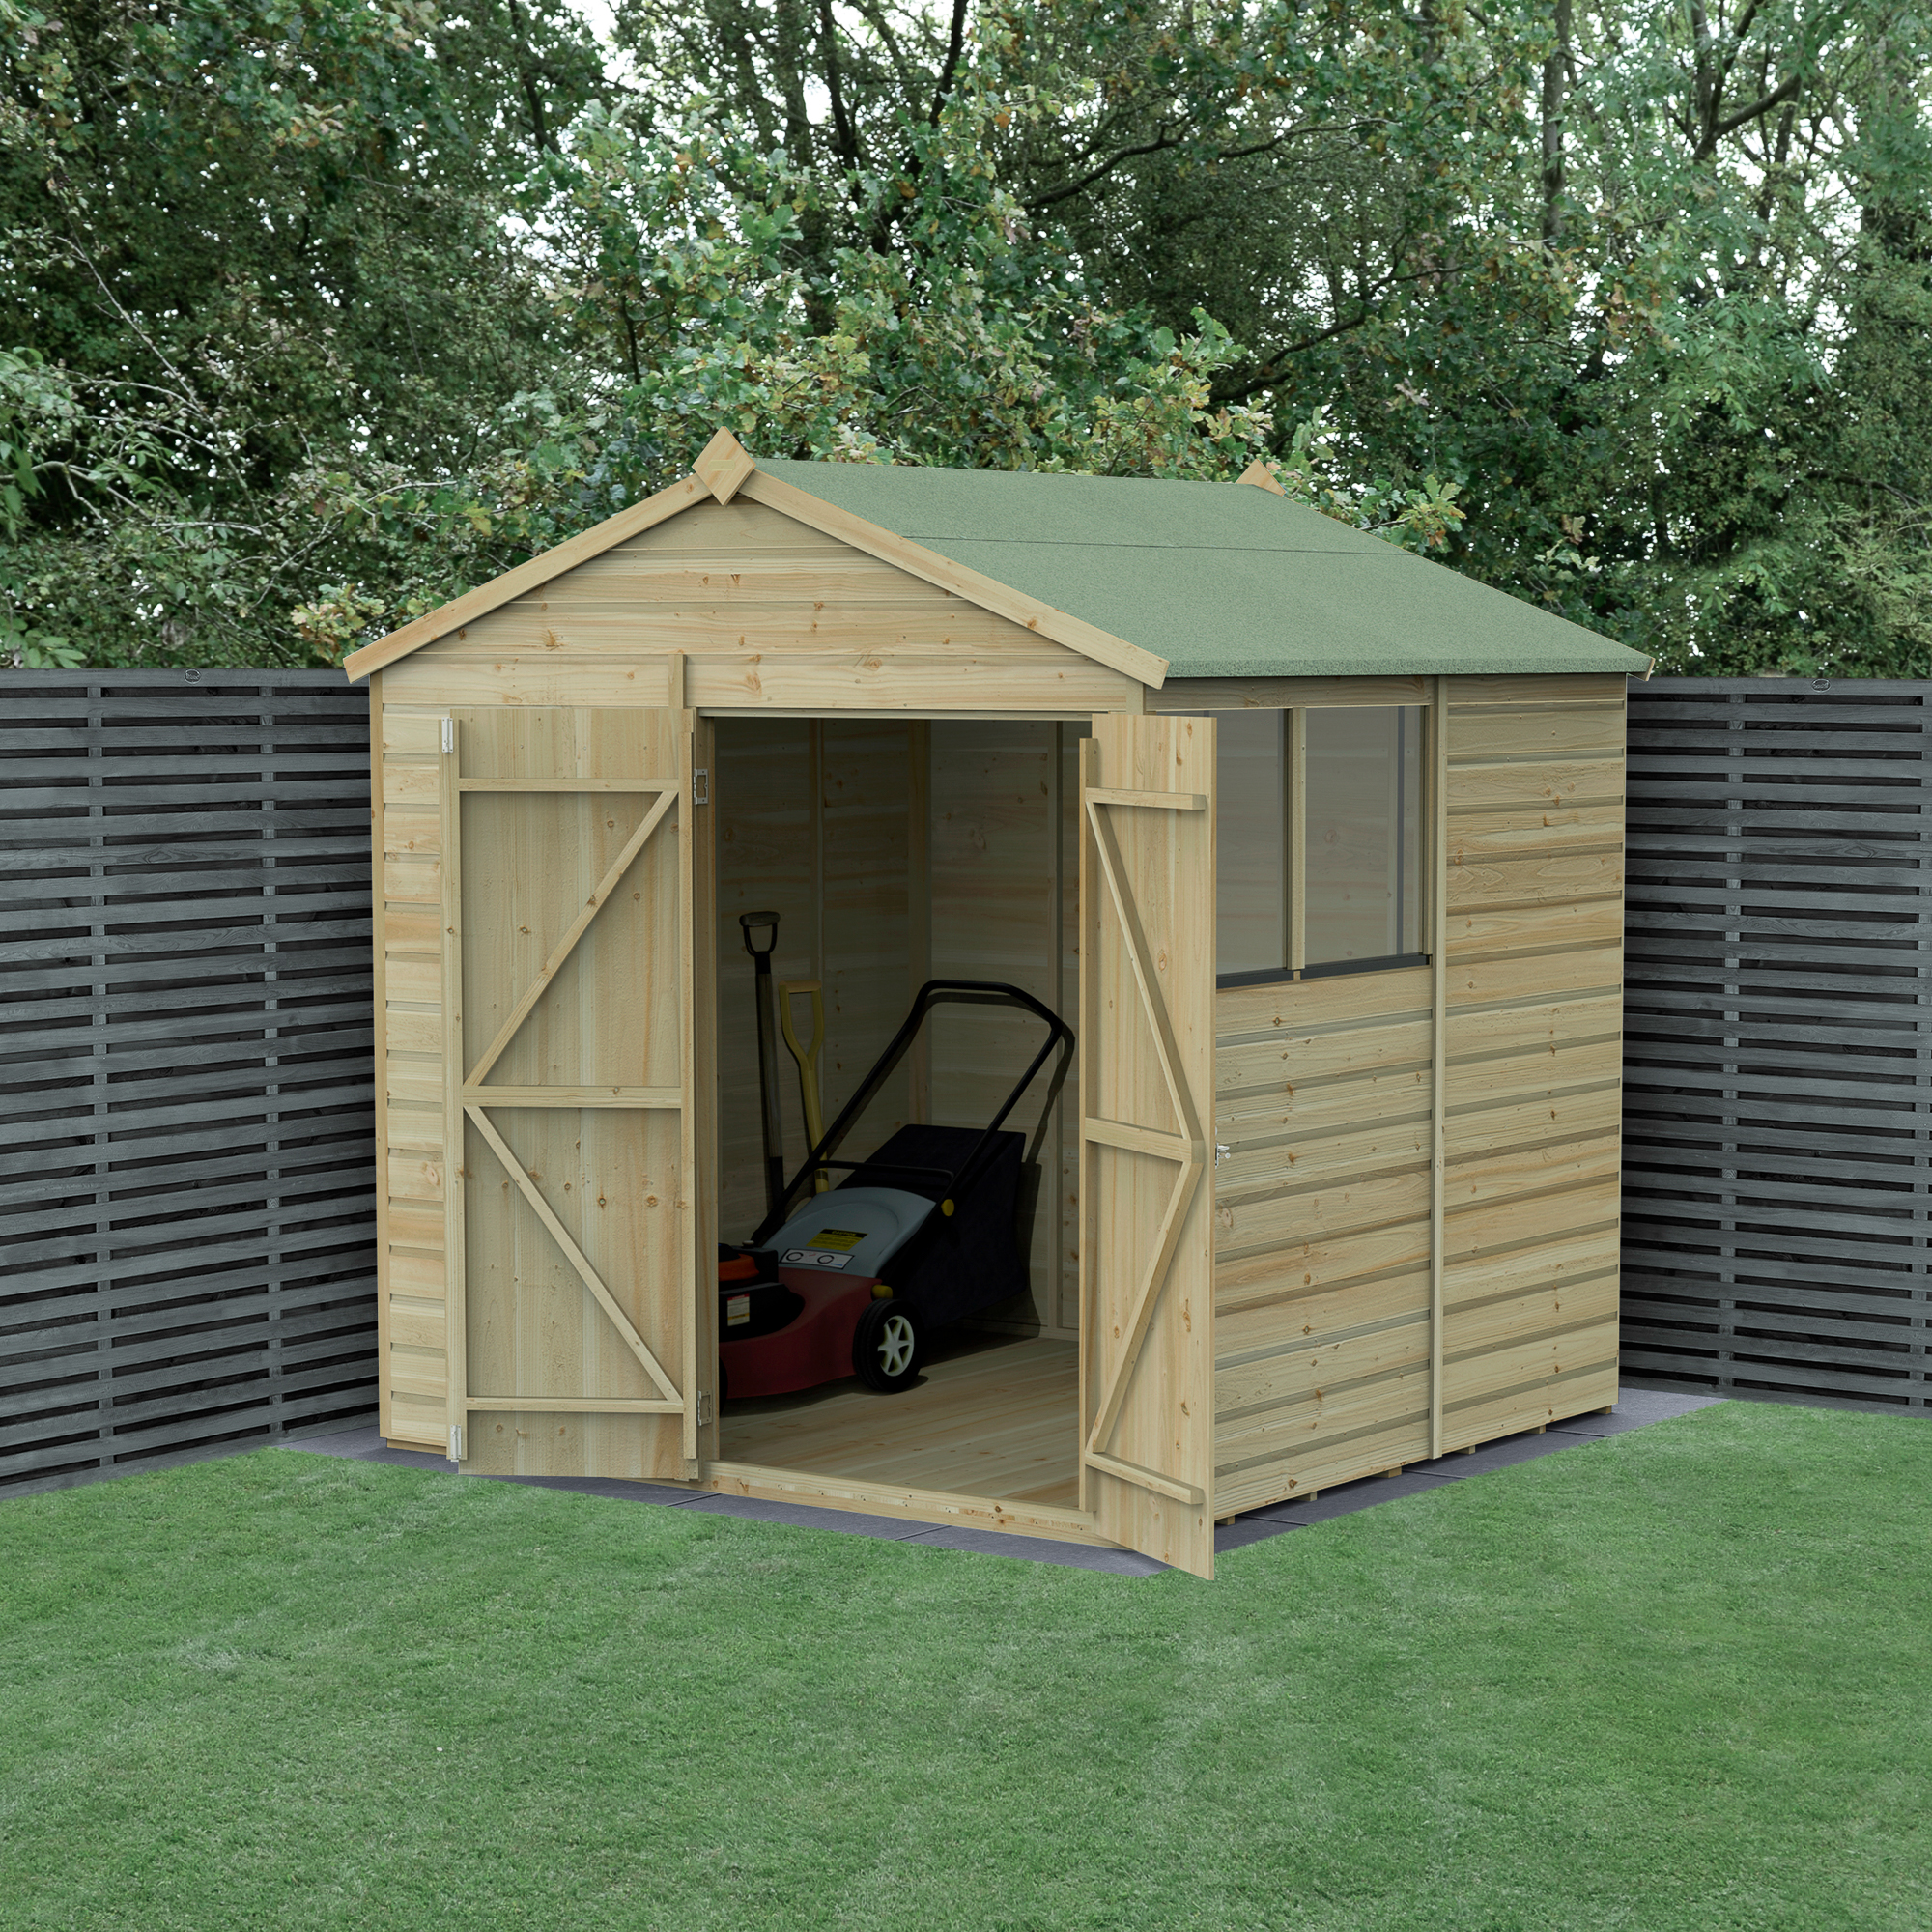 Forest Garden Beckwood 7 x 7ft Apex Shiplap Pressure Treated Double Door Shed